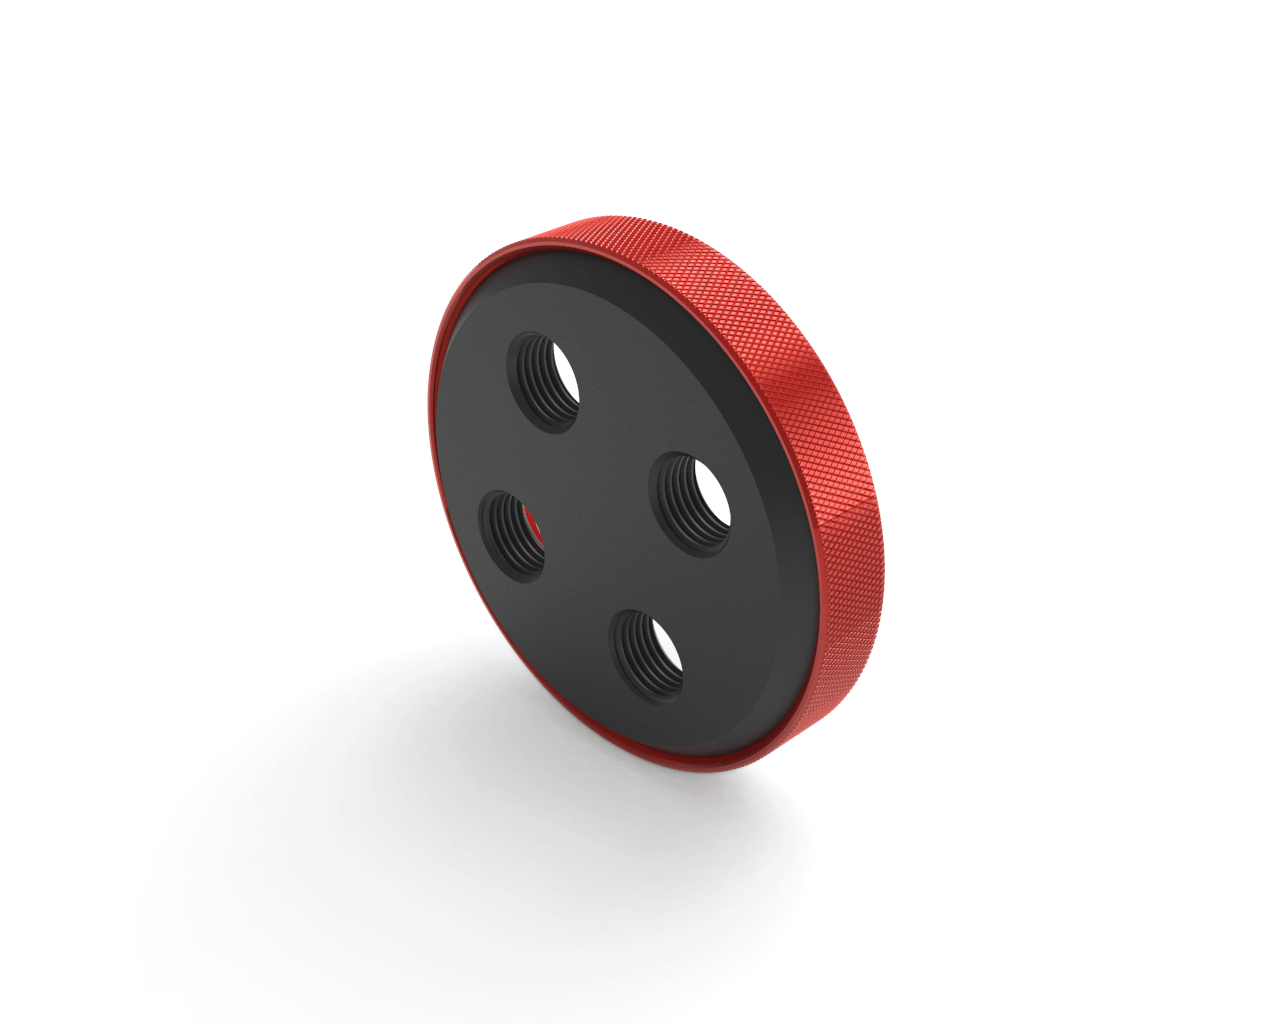 PrimoChill CTR Replacement SX Compression Ring - PrimoChill - KEEPING IT COOL Candy Red